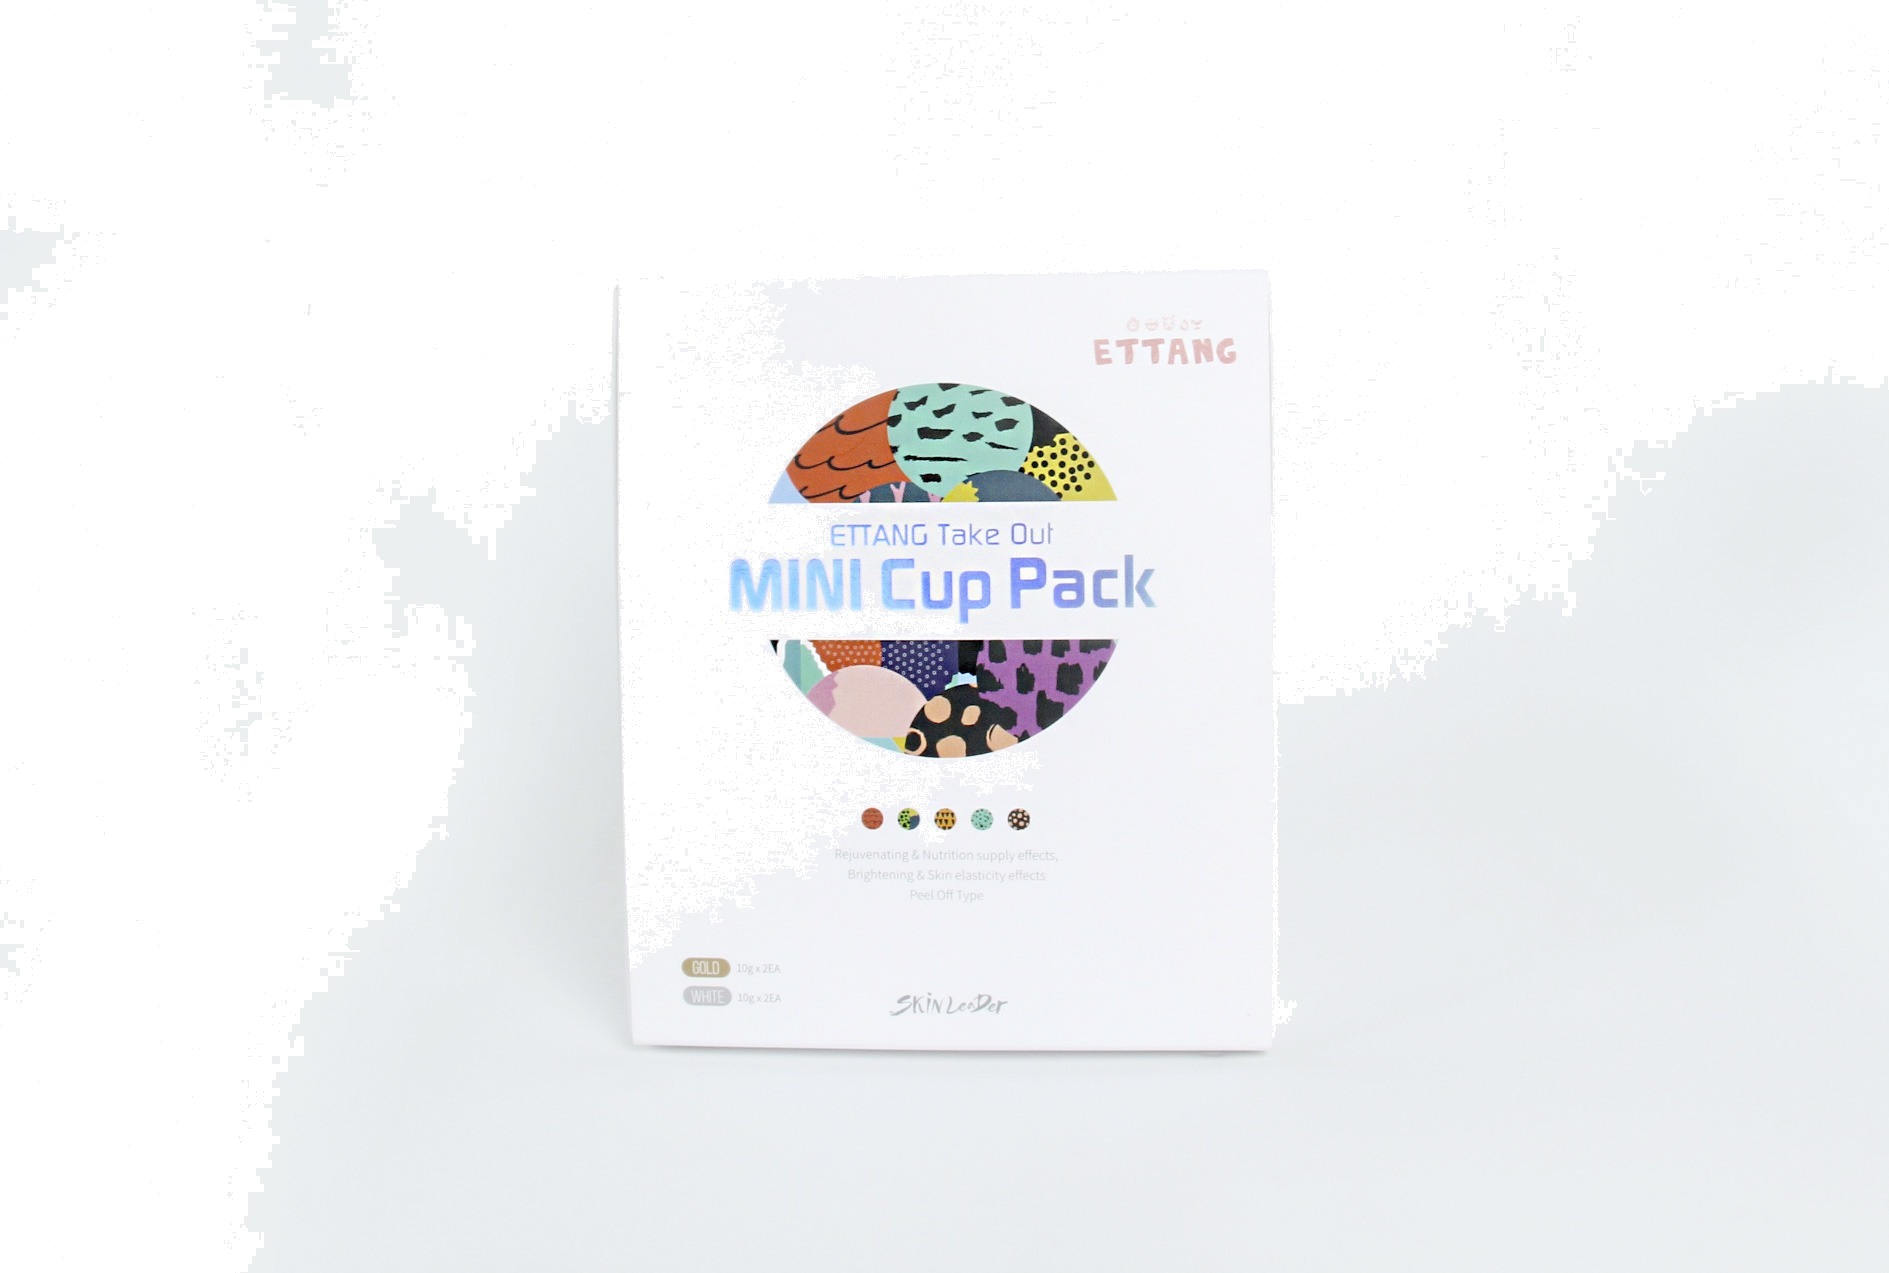 Ettang Take Out Mini Cup Pack